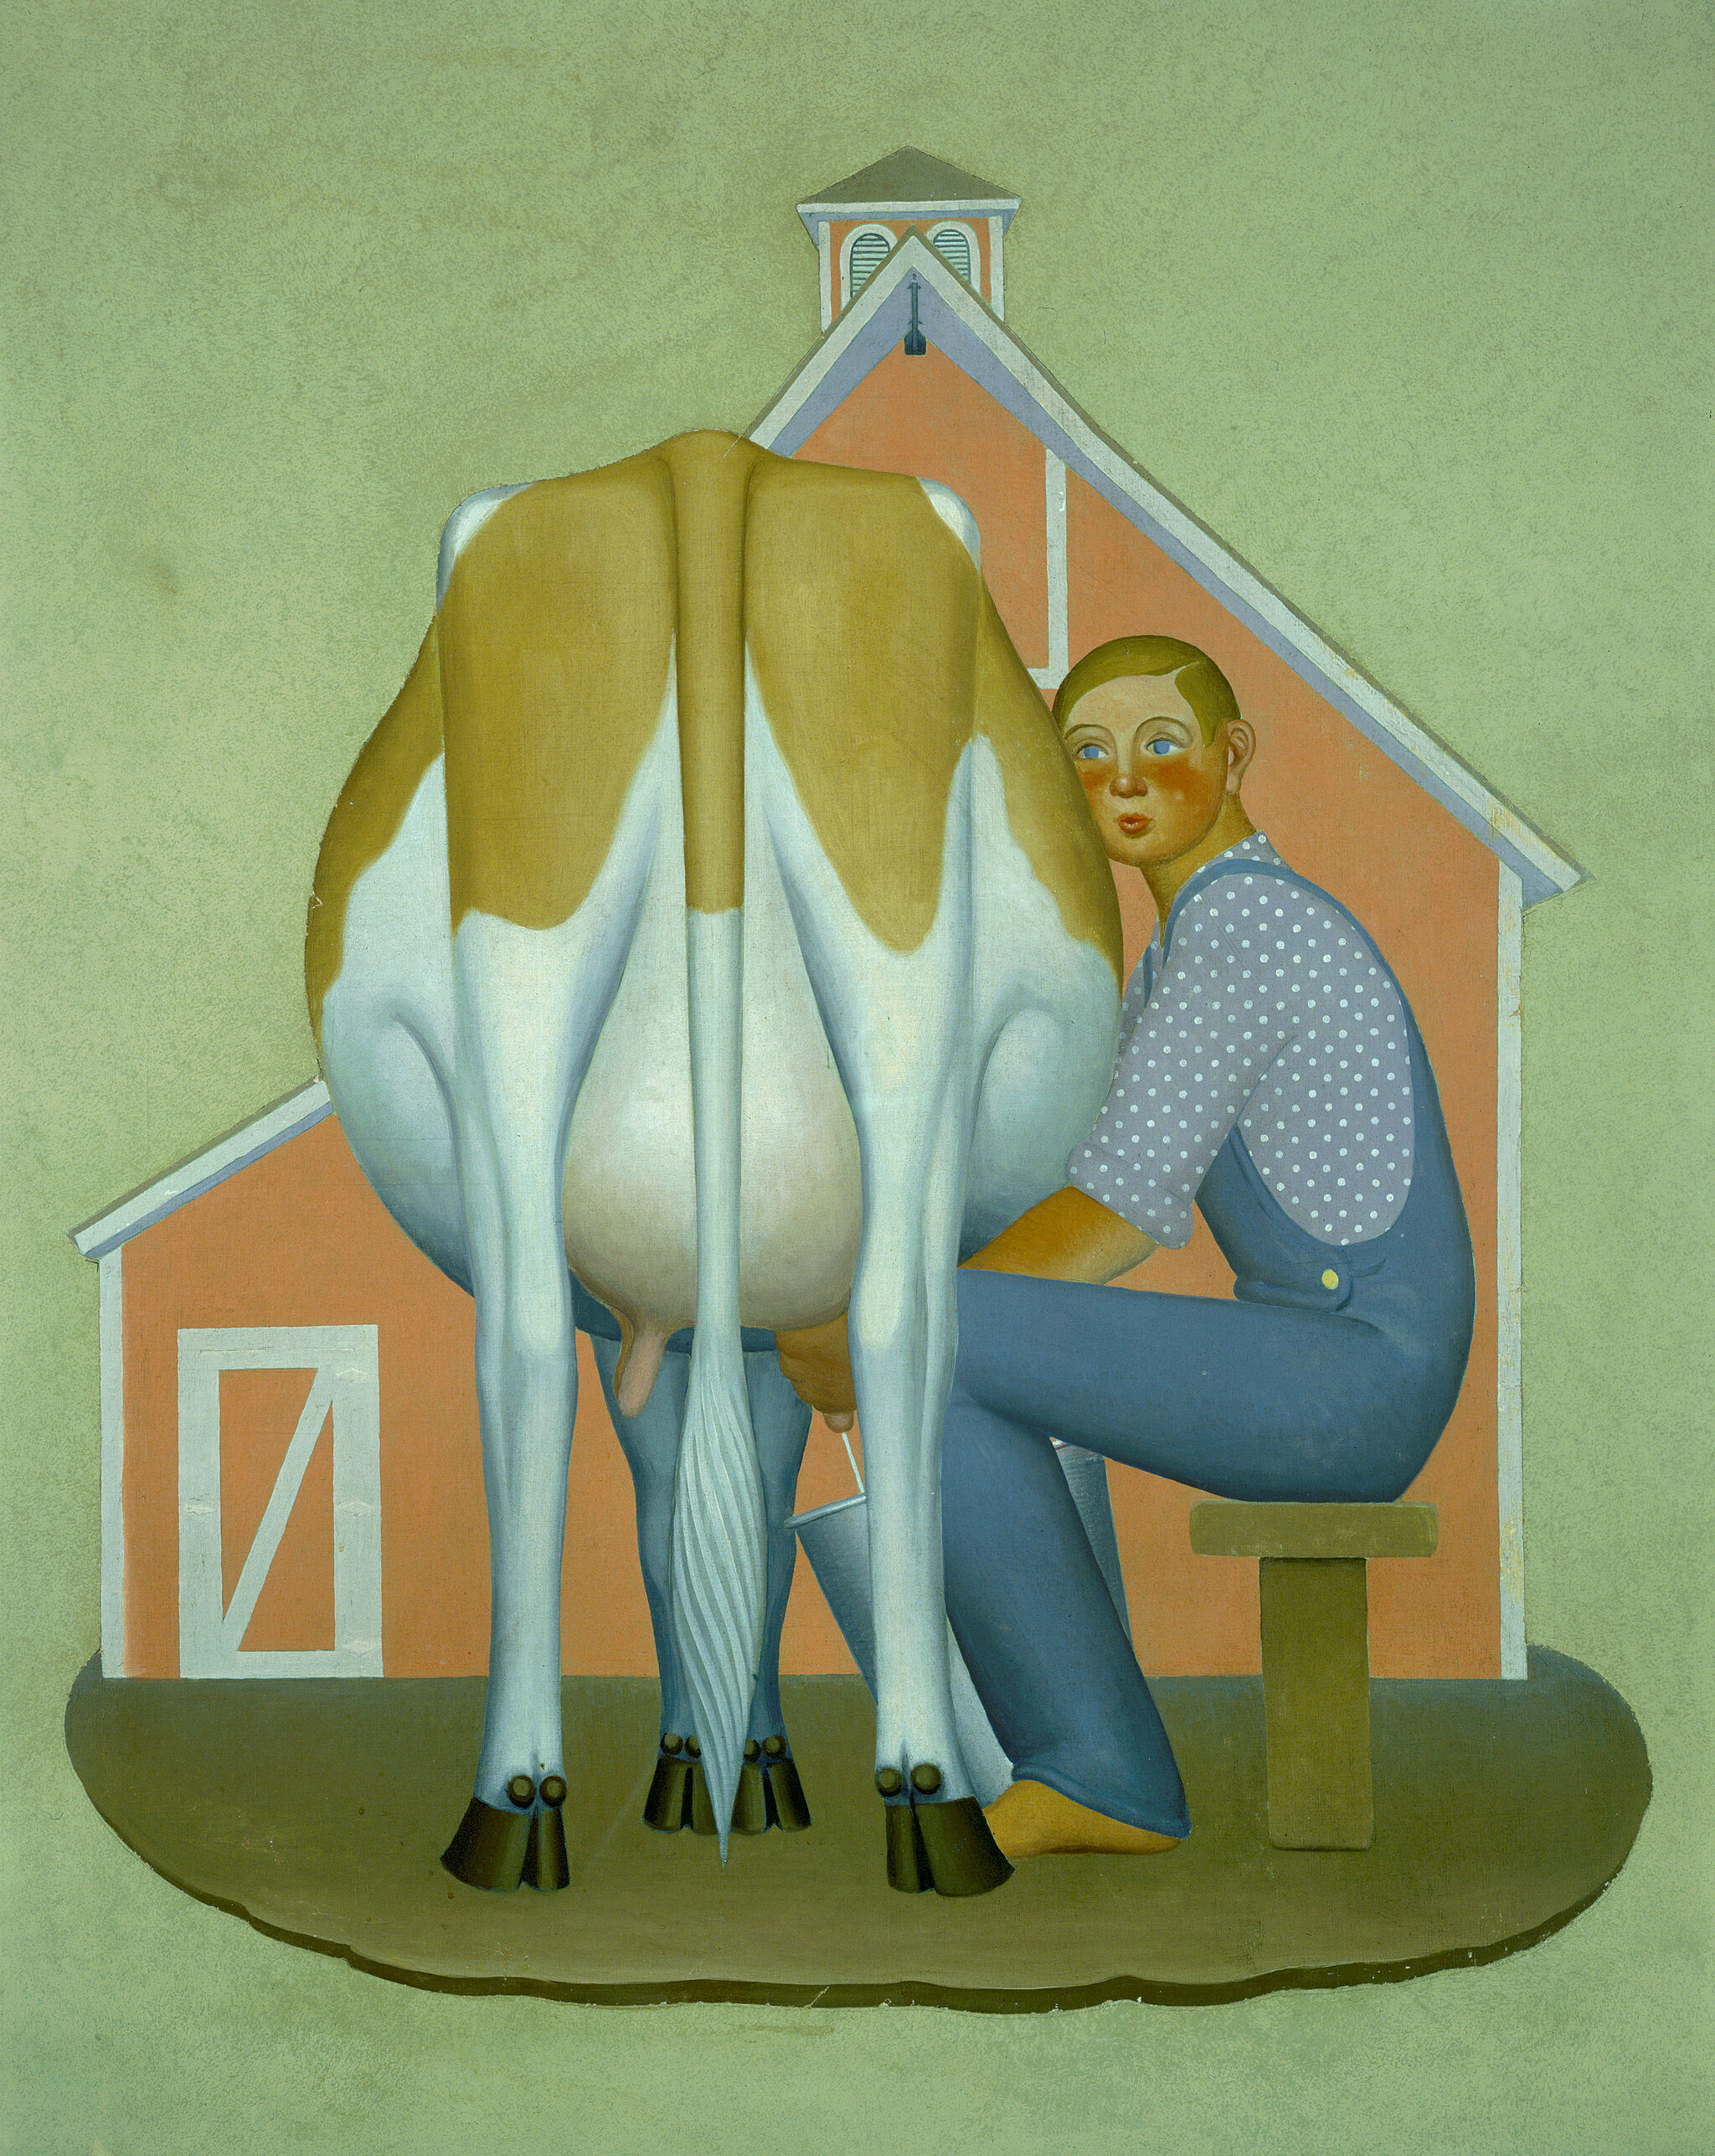 Painting of a boy milking a cow.